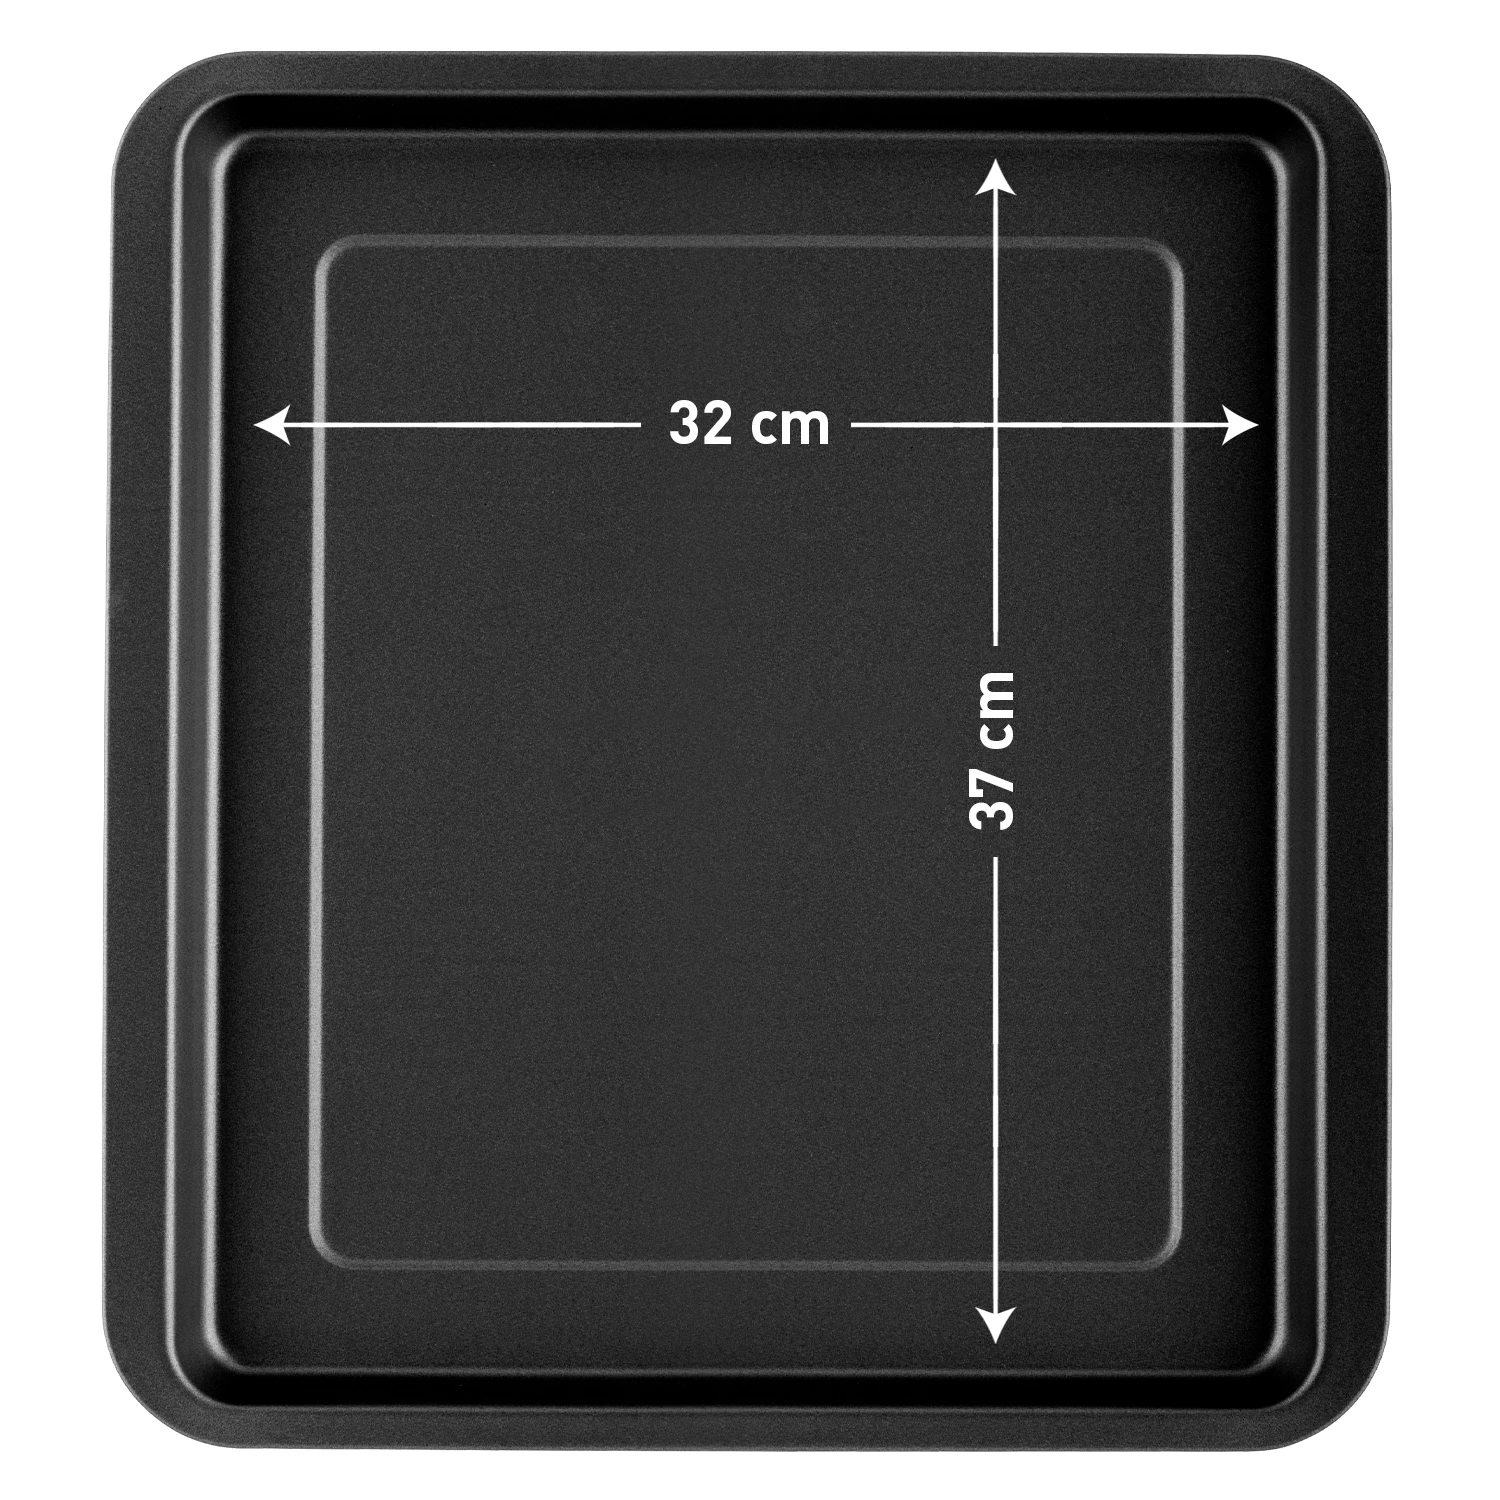 cm 32x37x2.1/inch 12.5x14.5x0.83 Cookie Sheet Rectangular Oven Tray Pizza Tray Non-Stick Coating Private Label  Made In Italy